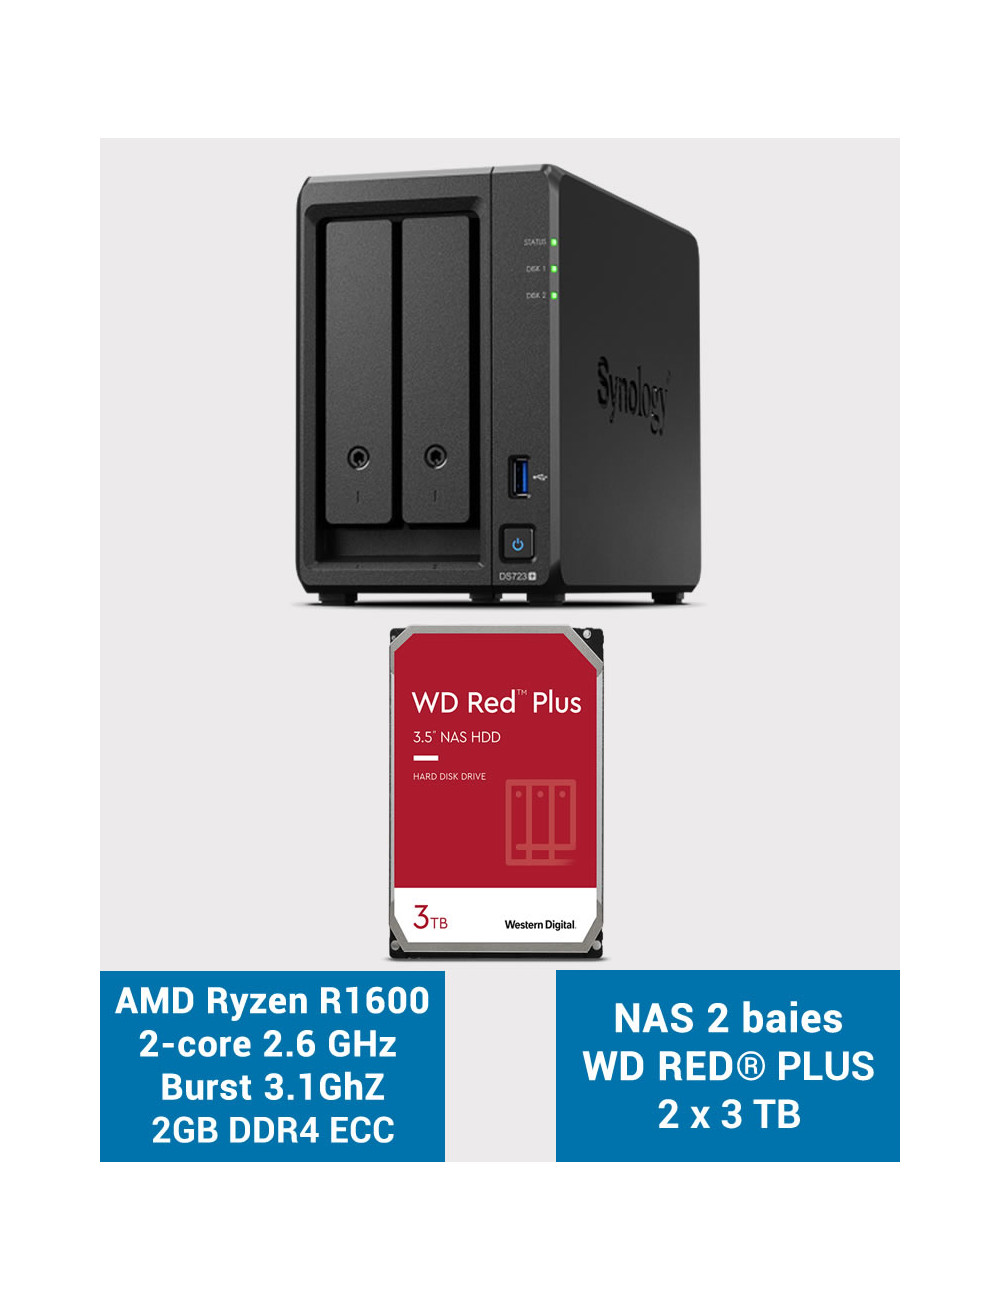 Synology DS723+ NAS Server WD RED PLUS 6TB (2x3TB)